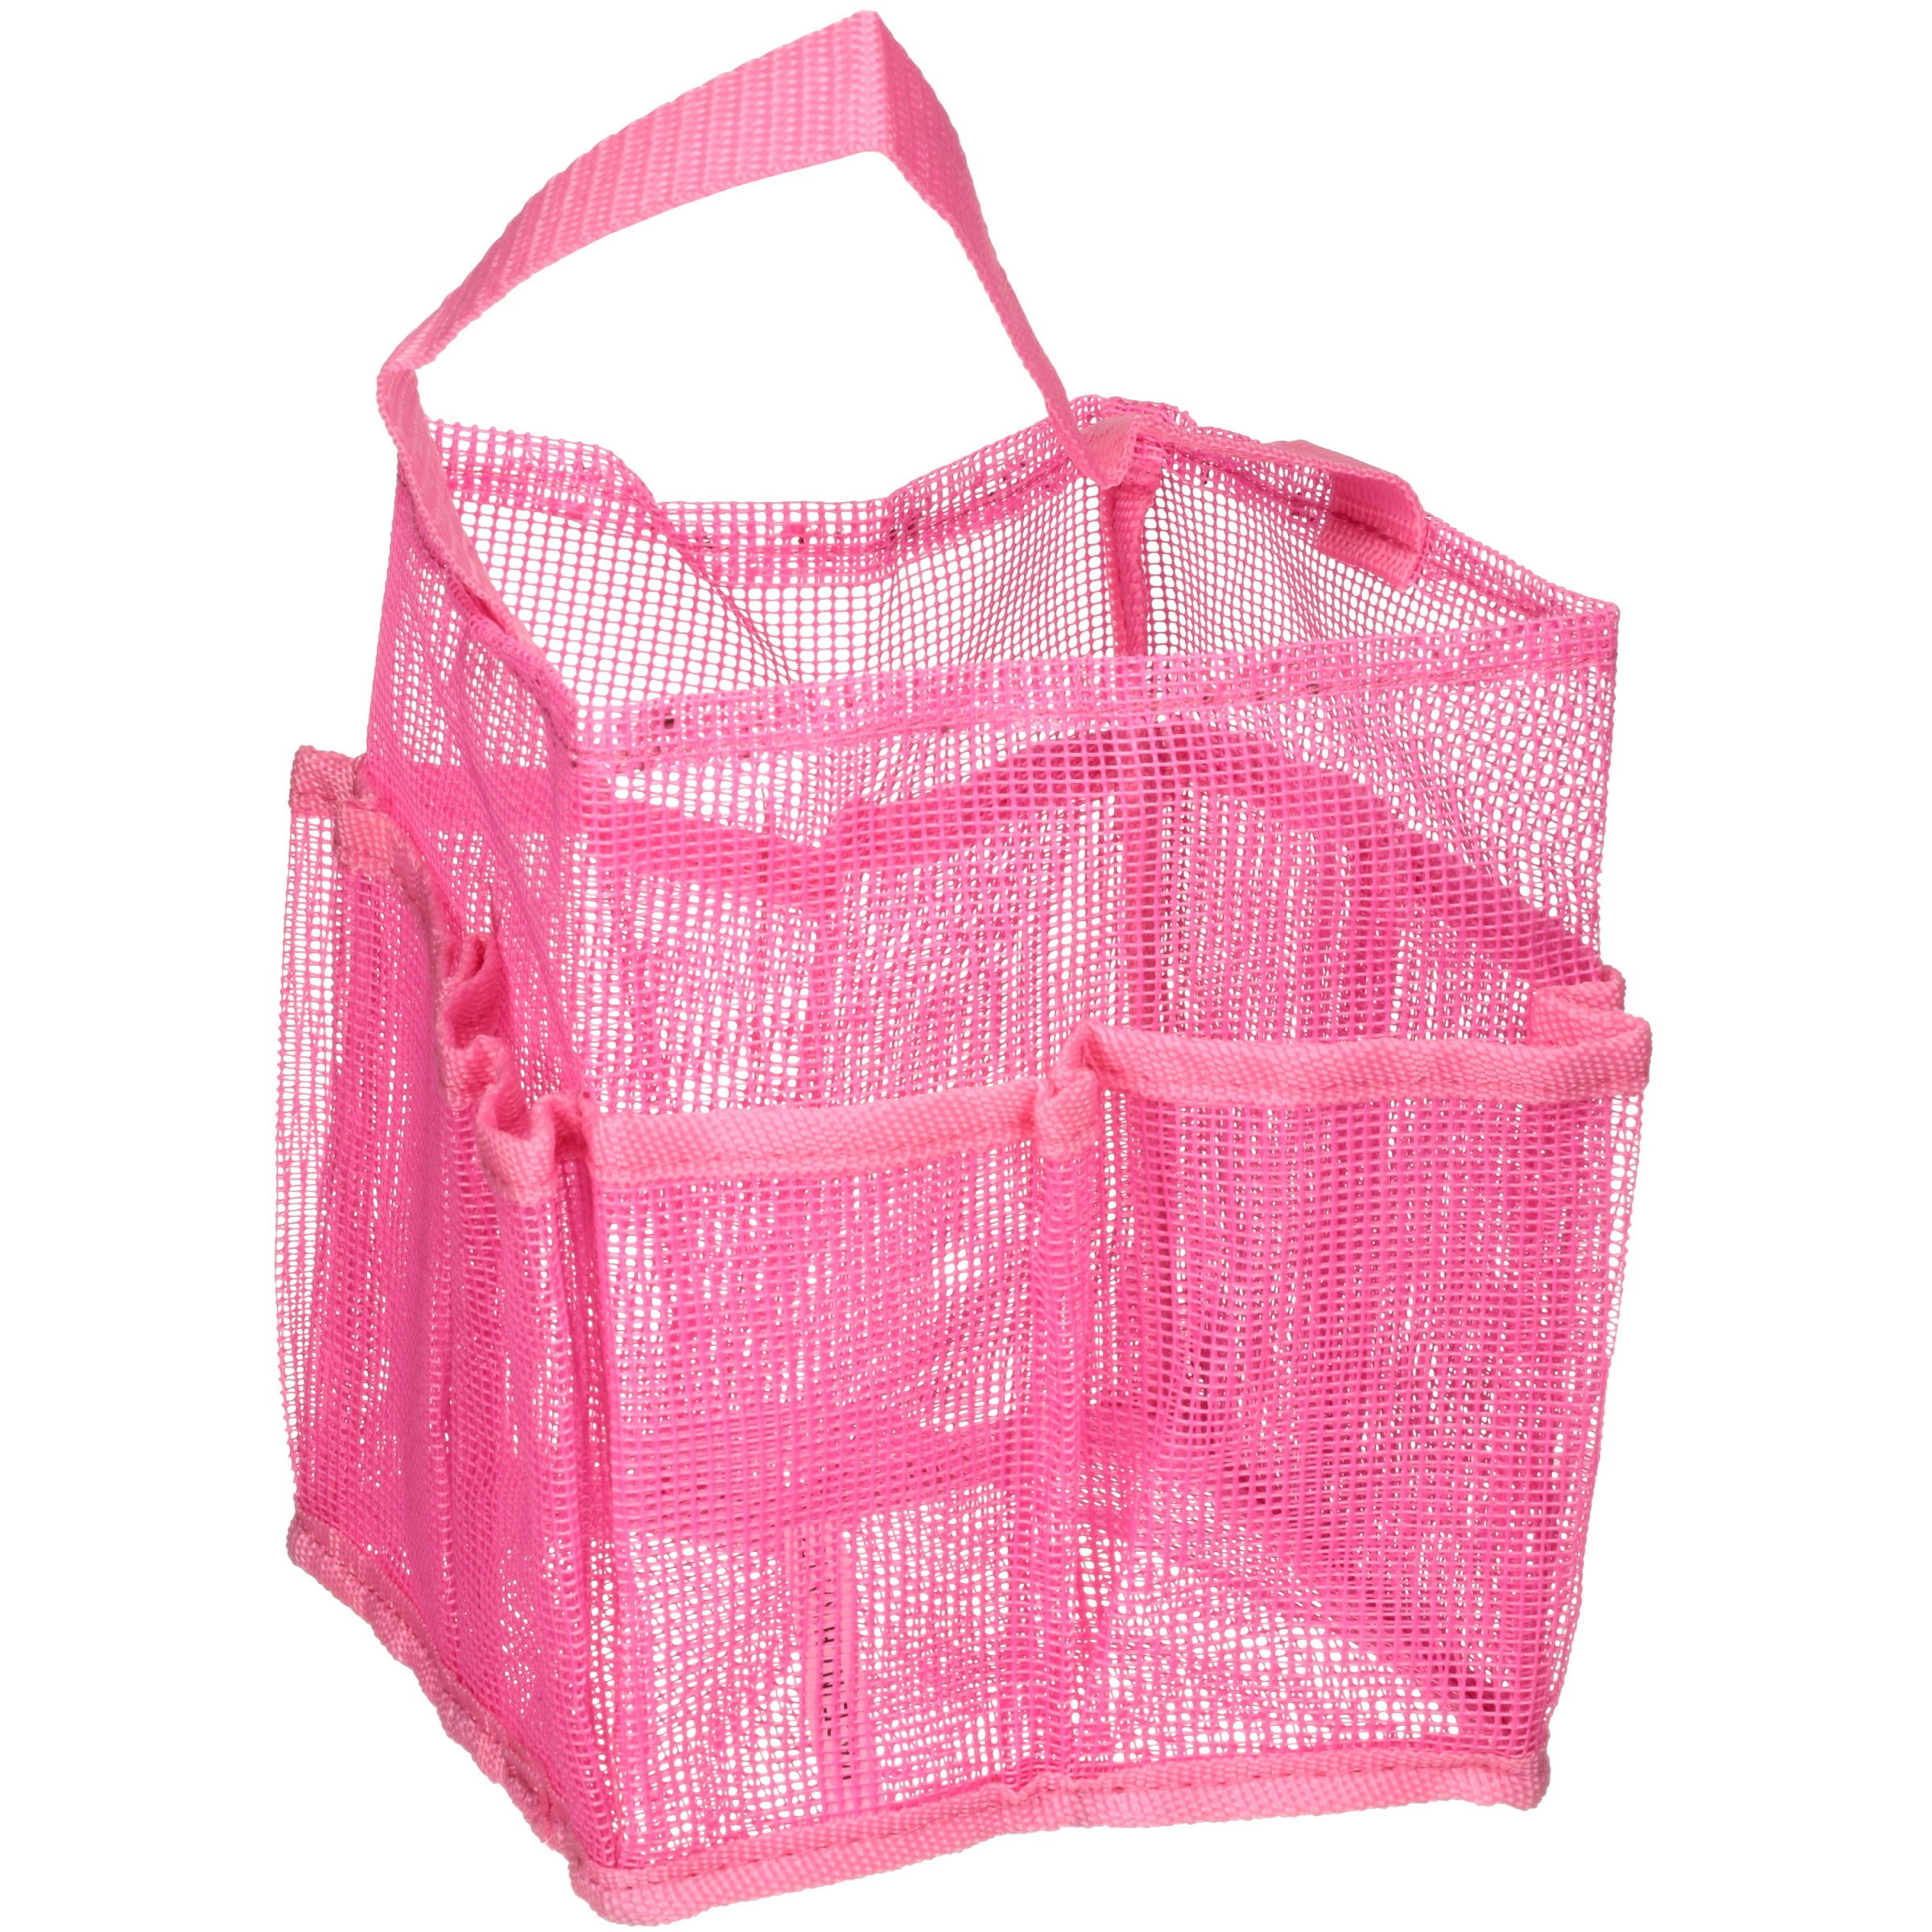 Yescom Portable Mesh Shower Caddy Tote 8 Pockets Bathroom Carry Bag Pink/Black  Opt, 1 - Fry's Food Stores